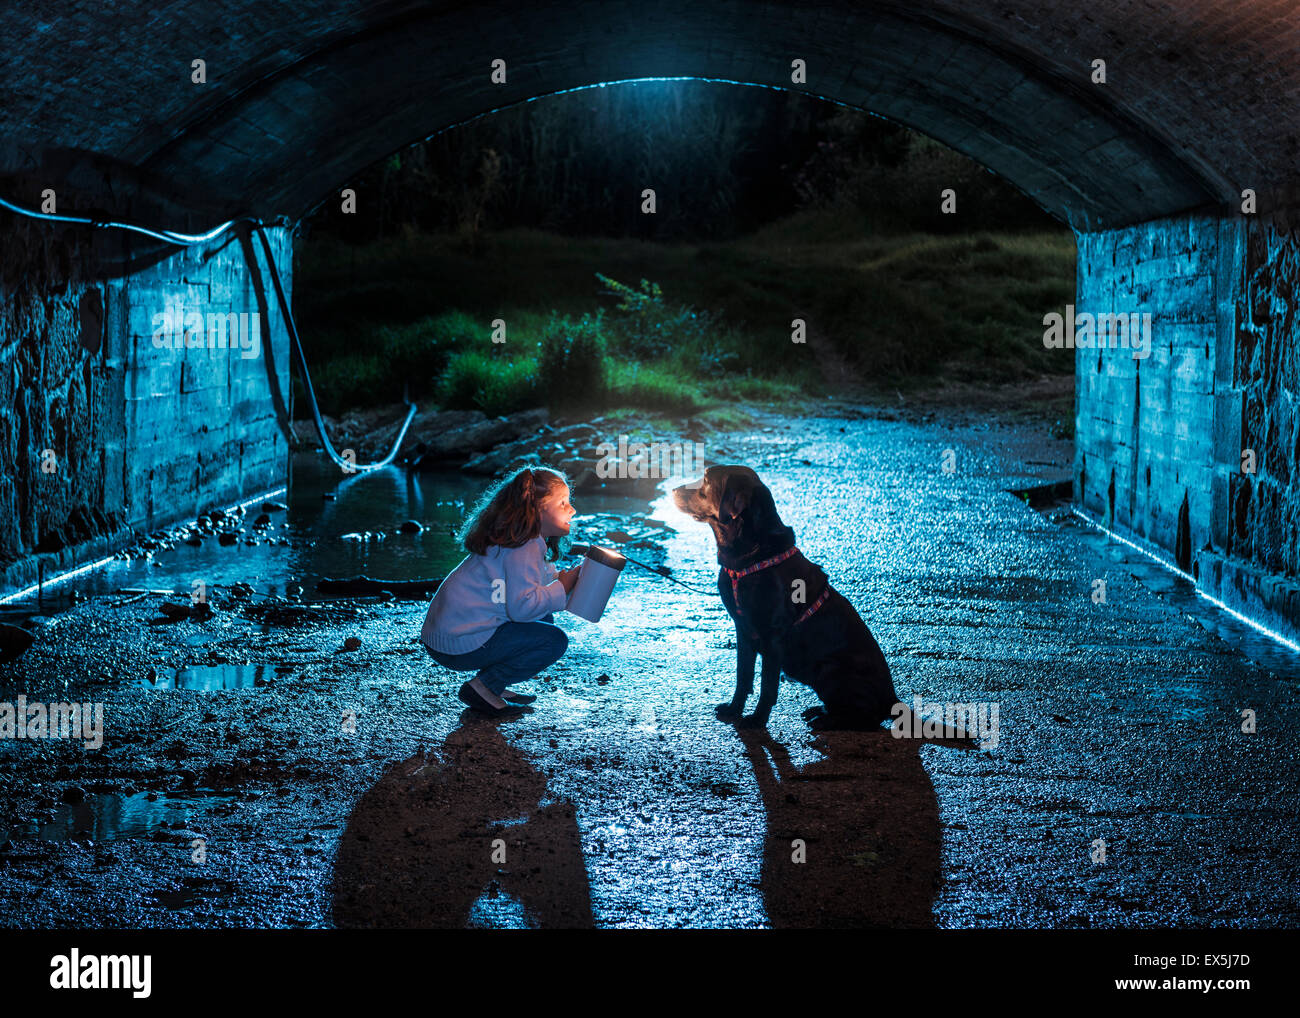 Little girl and her pet dog in a dark tunnel. Stock Photo